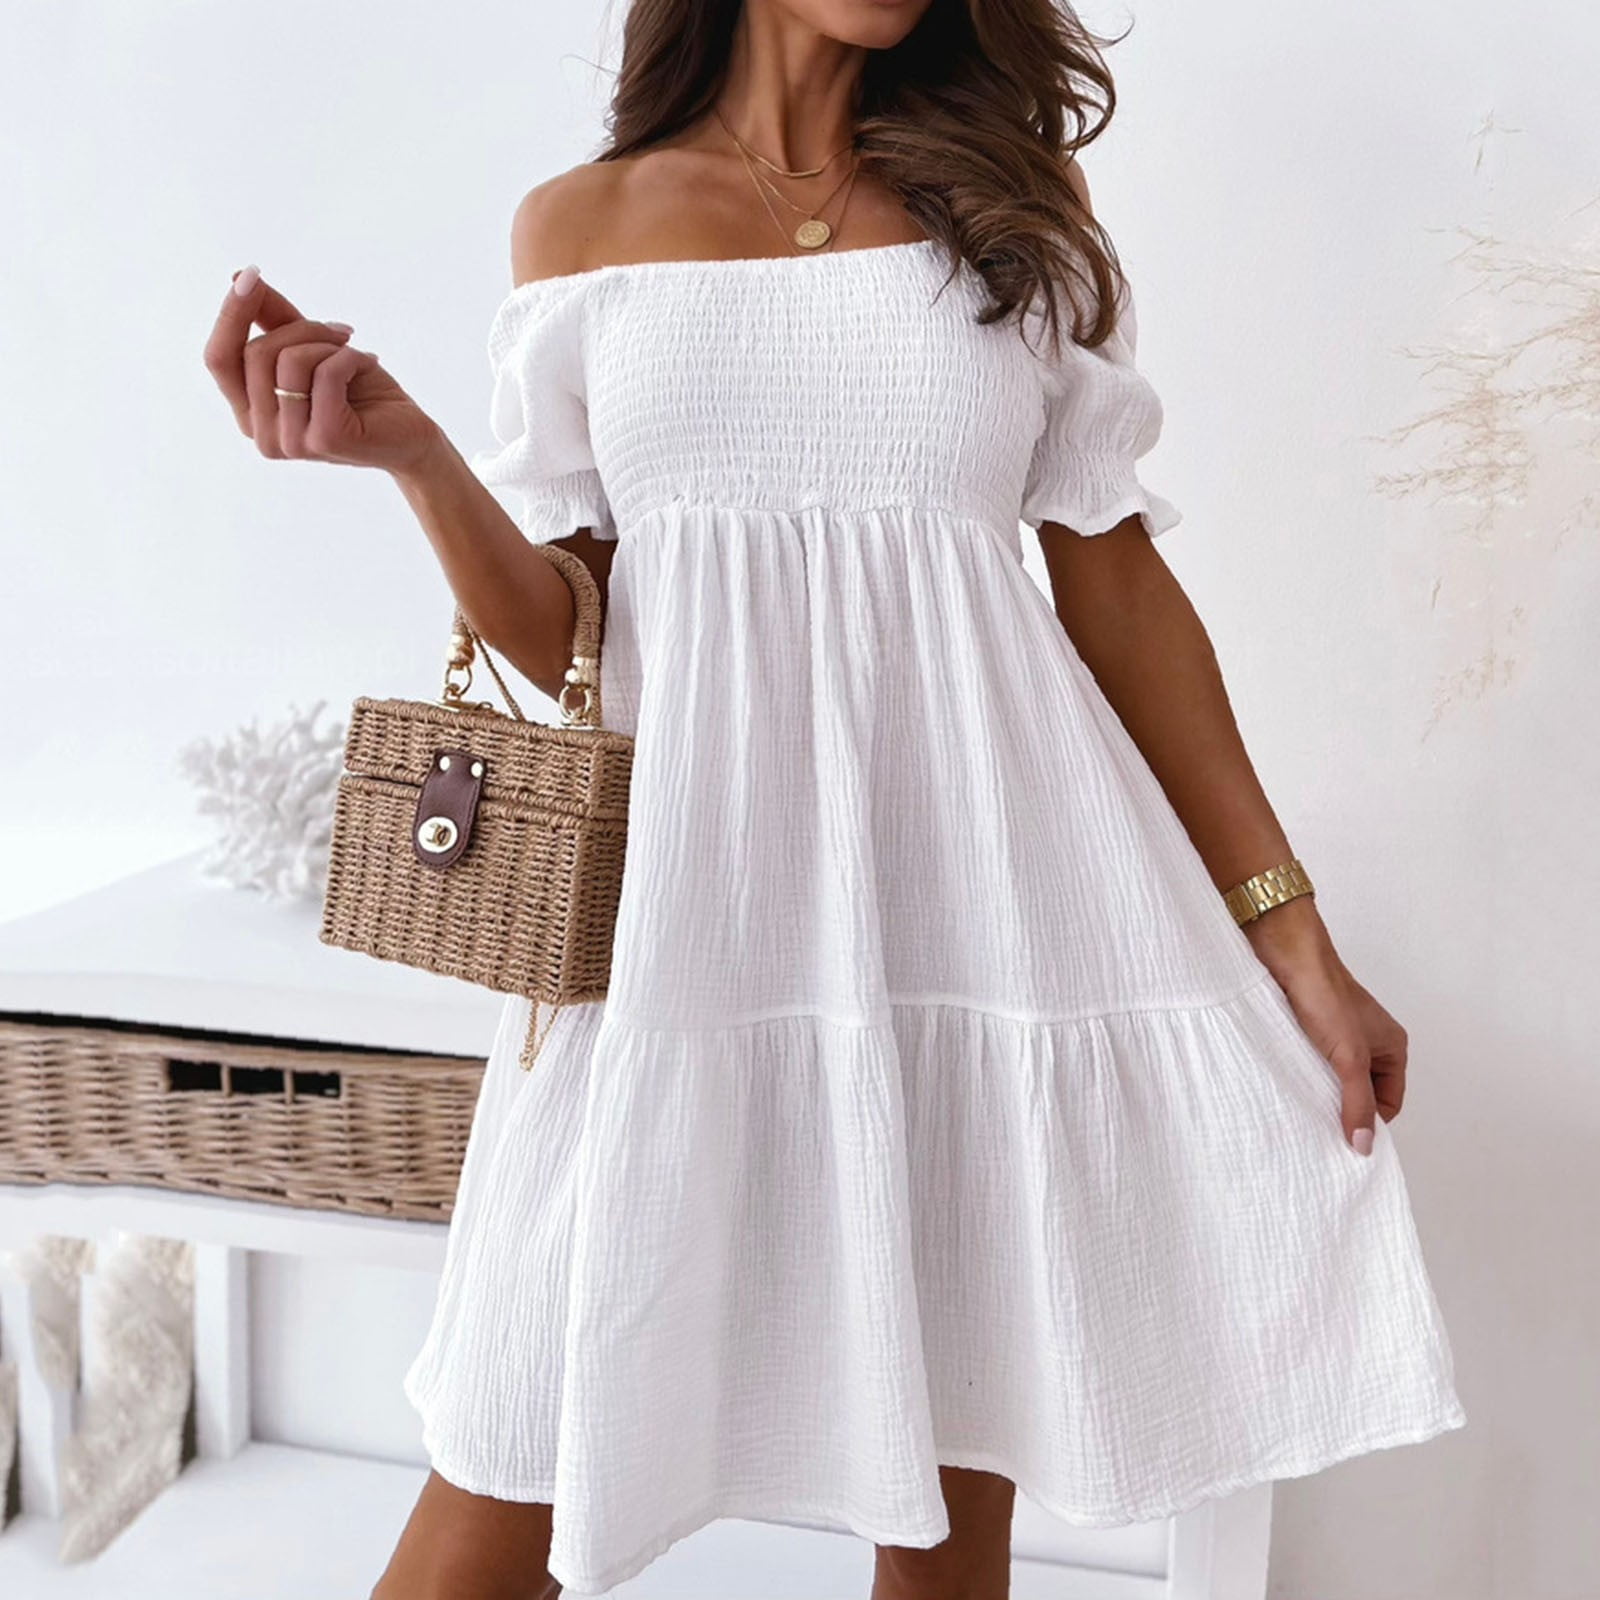 casual white dress